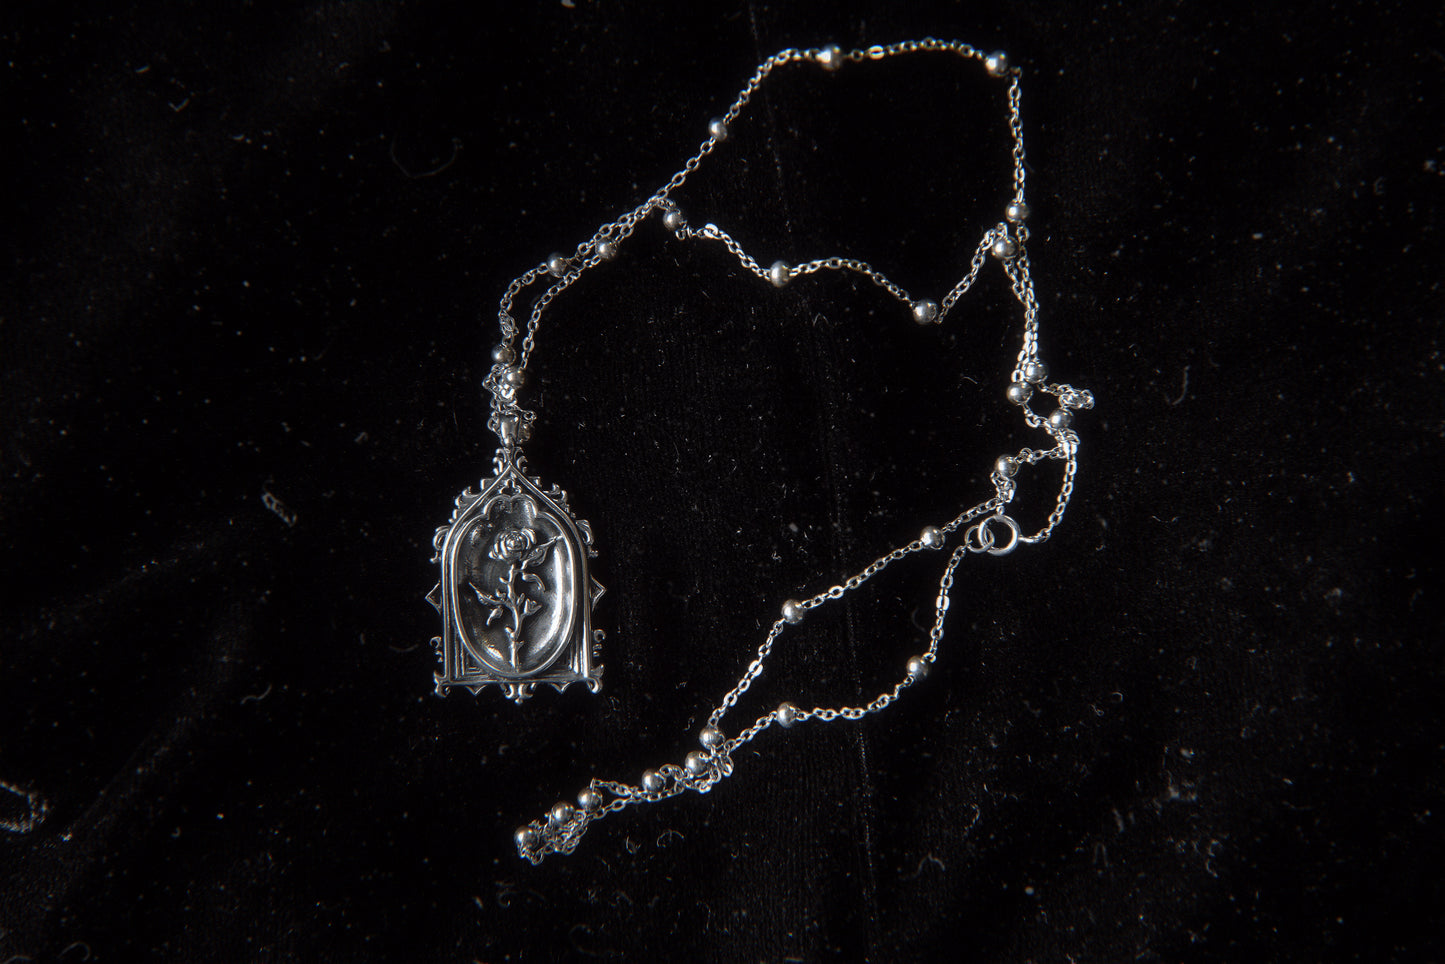 PRE-ORDER: The "Lenore's Tomb” Curio Necklace